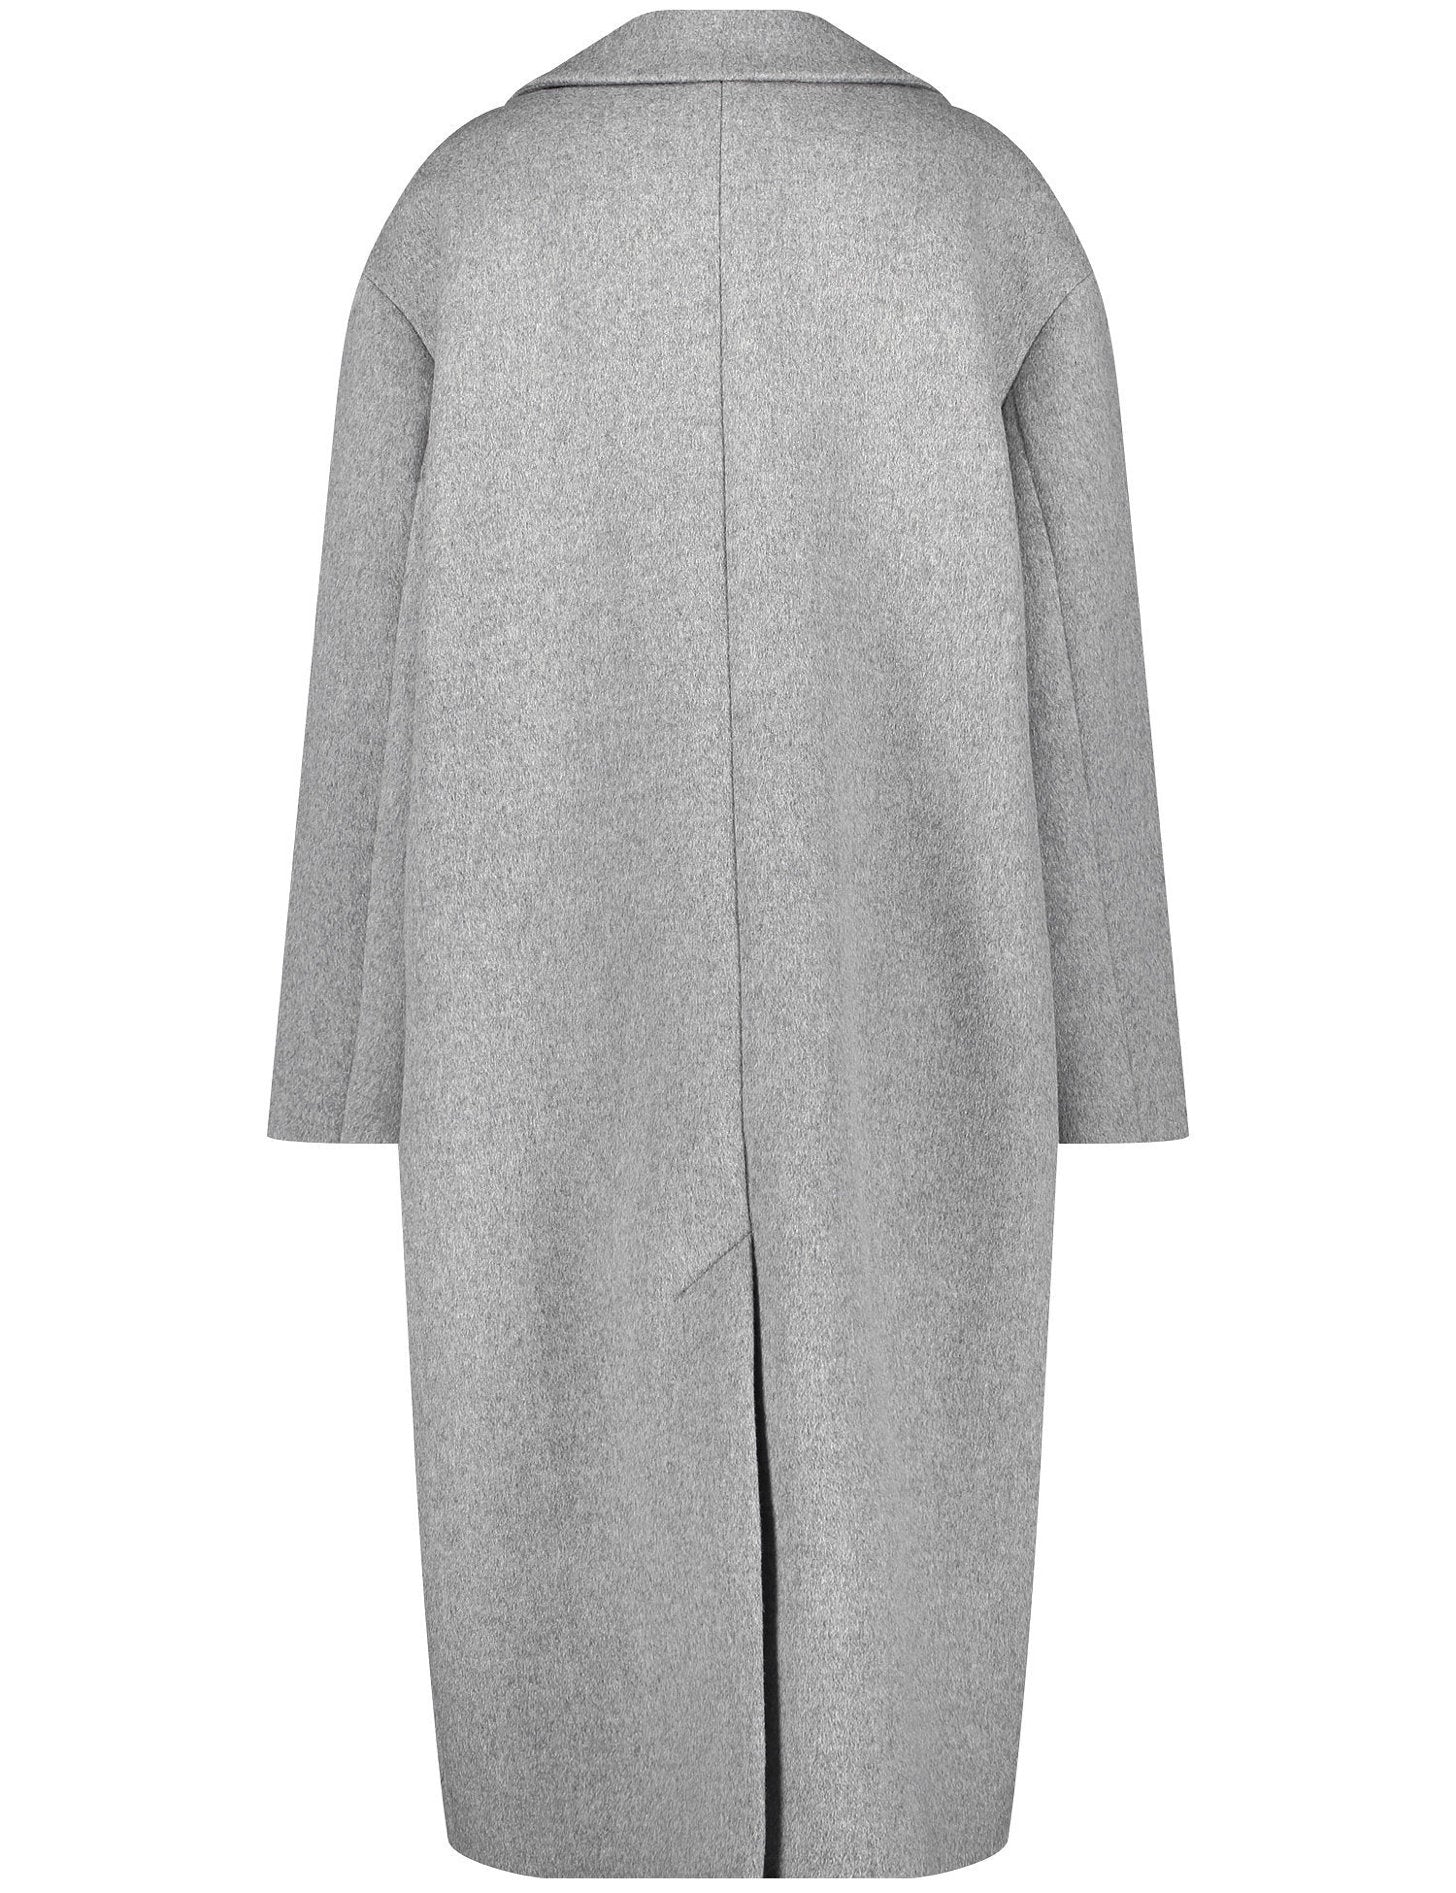 Coat In A Slightly Oversized Cut With Wool_250014-31135_20348_03